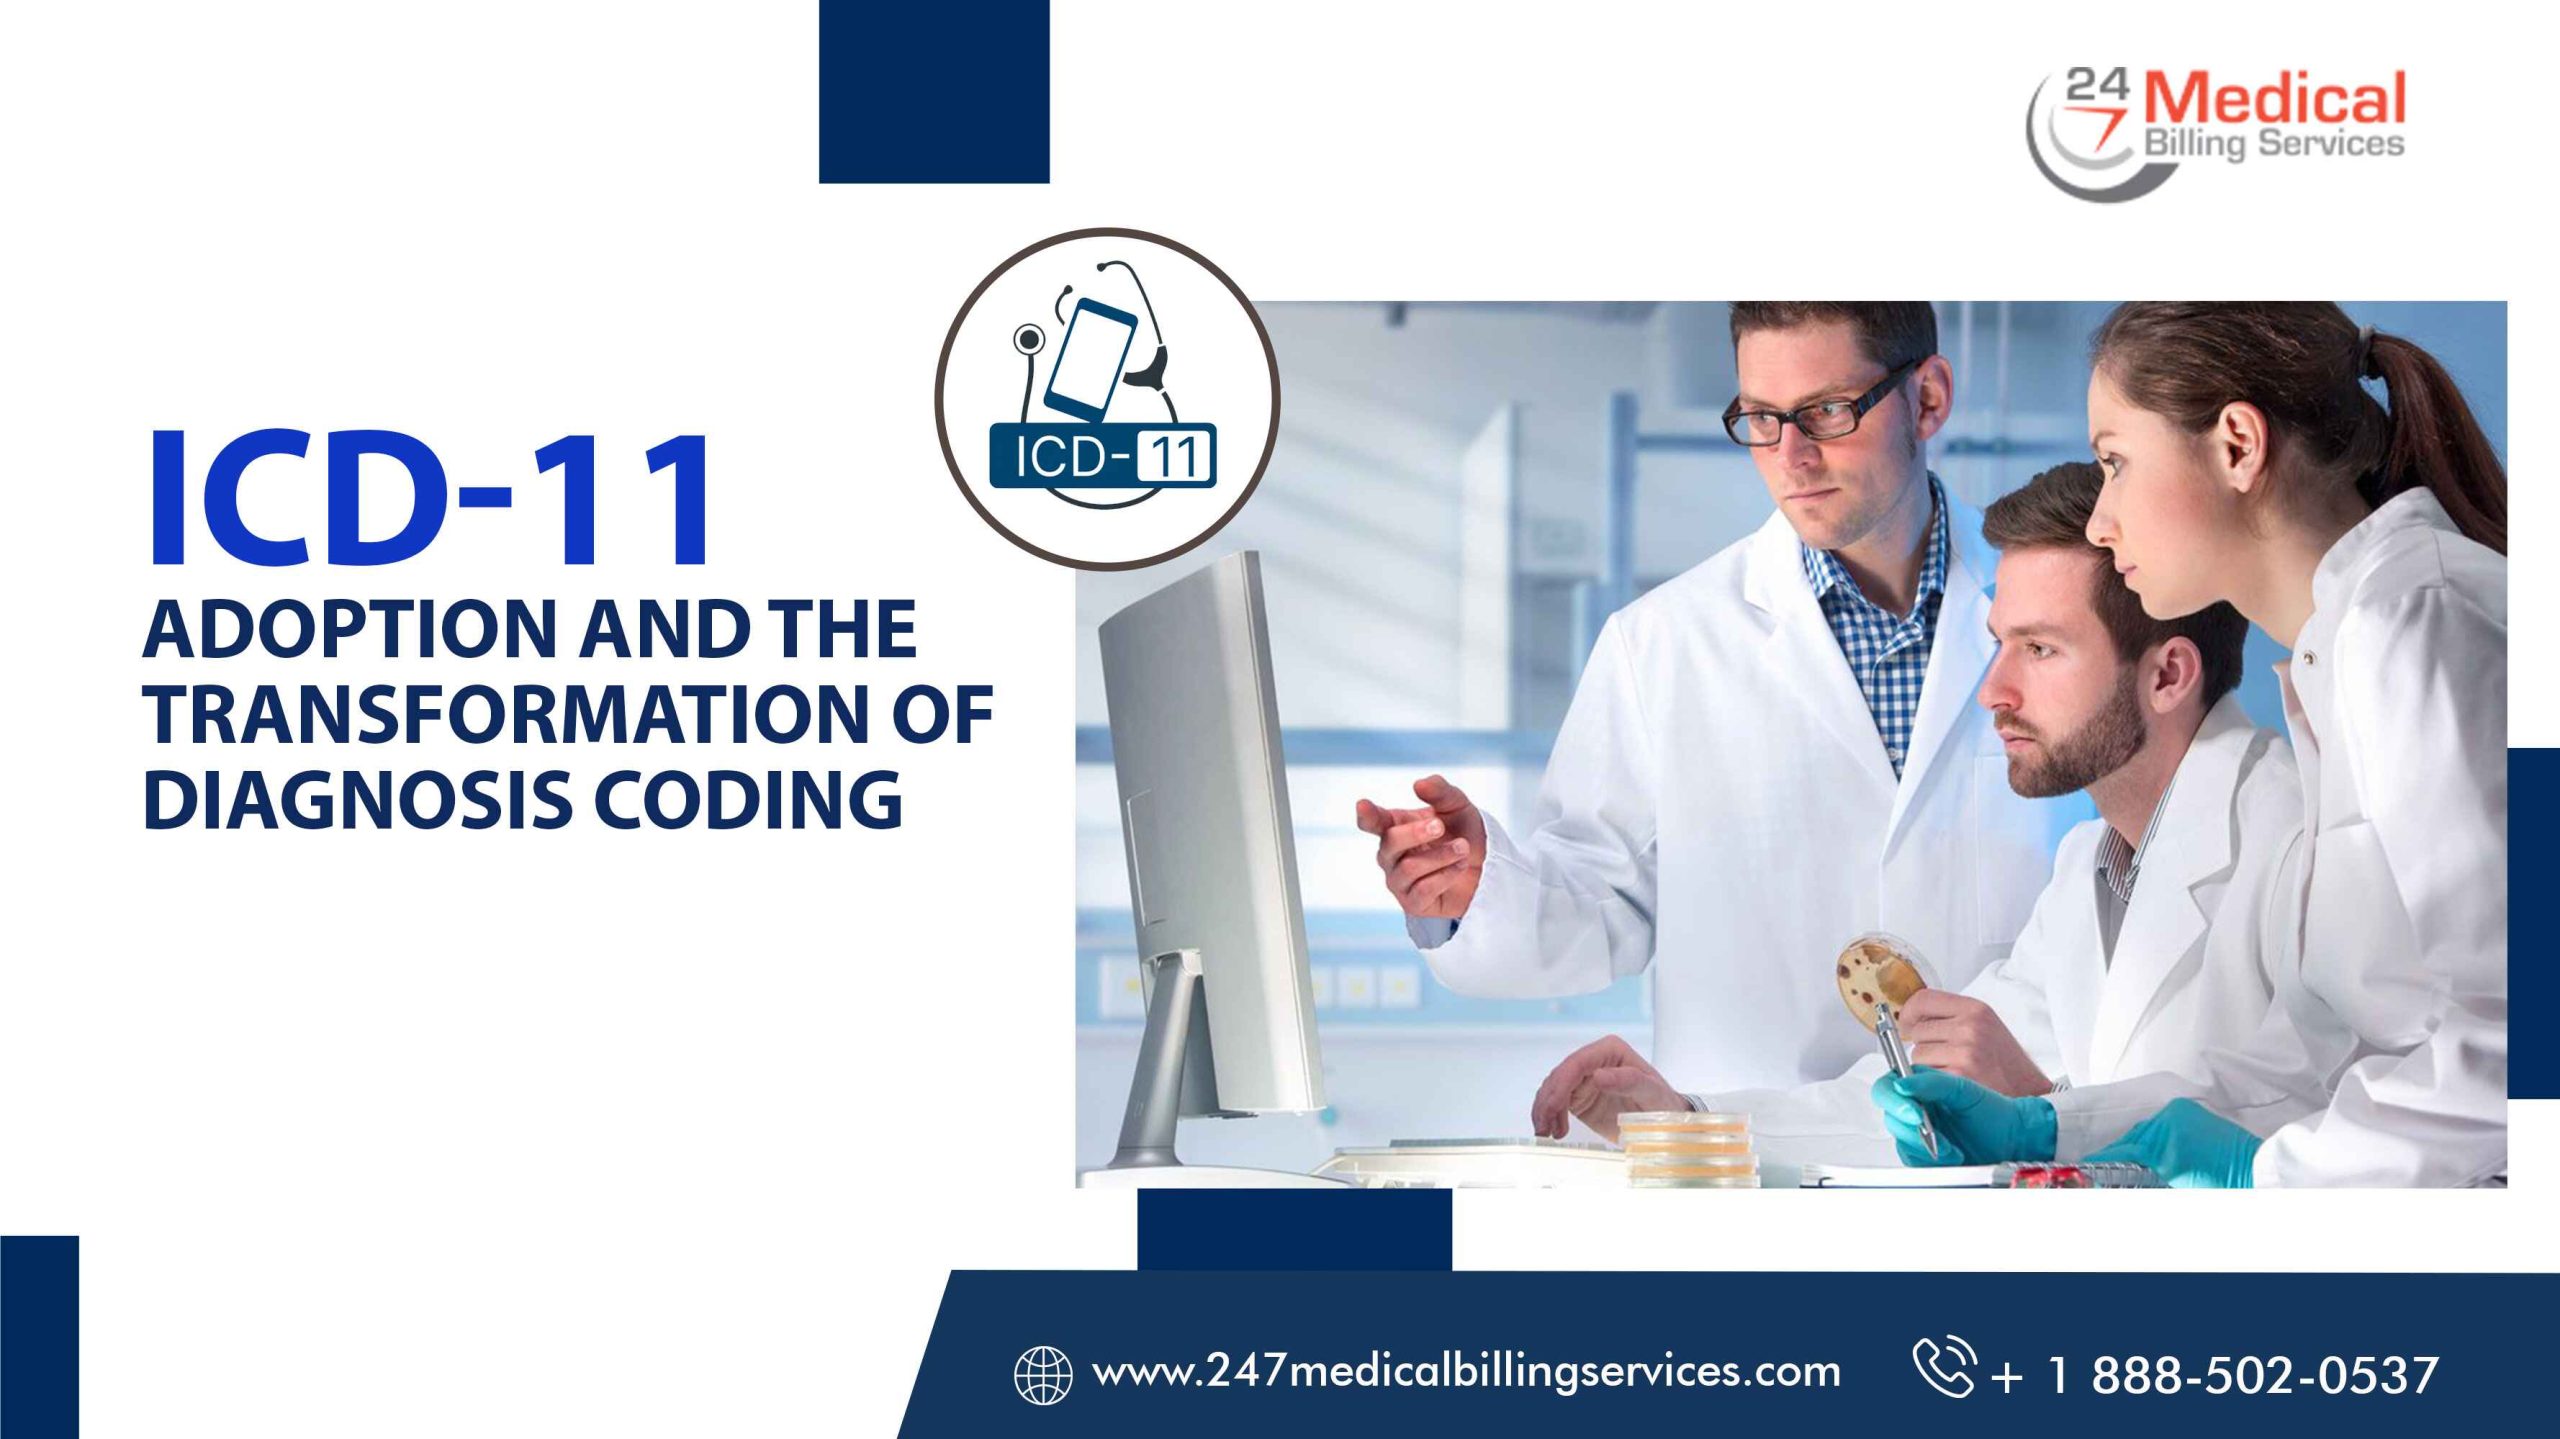  ICD-11 Adoption and the Transformation of Diagnosis Coding